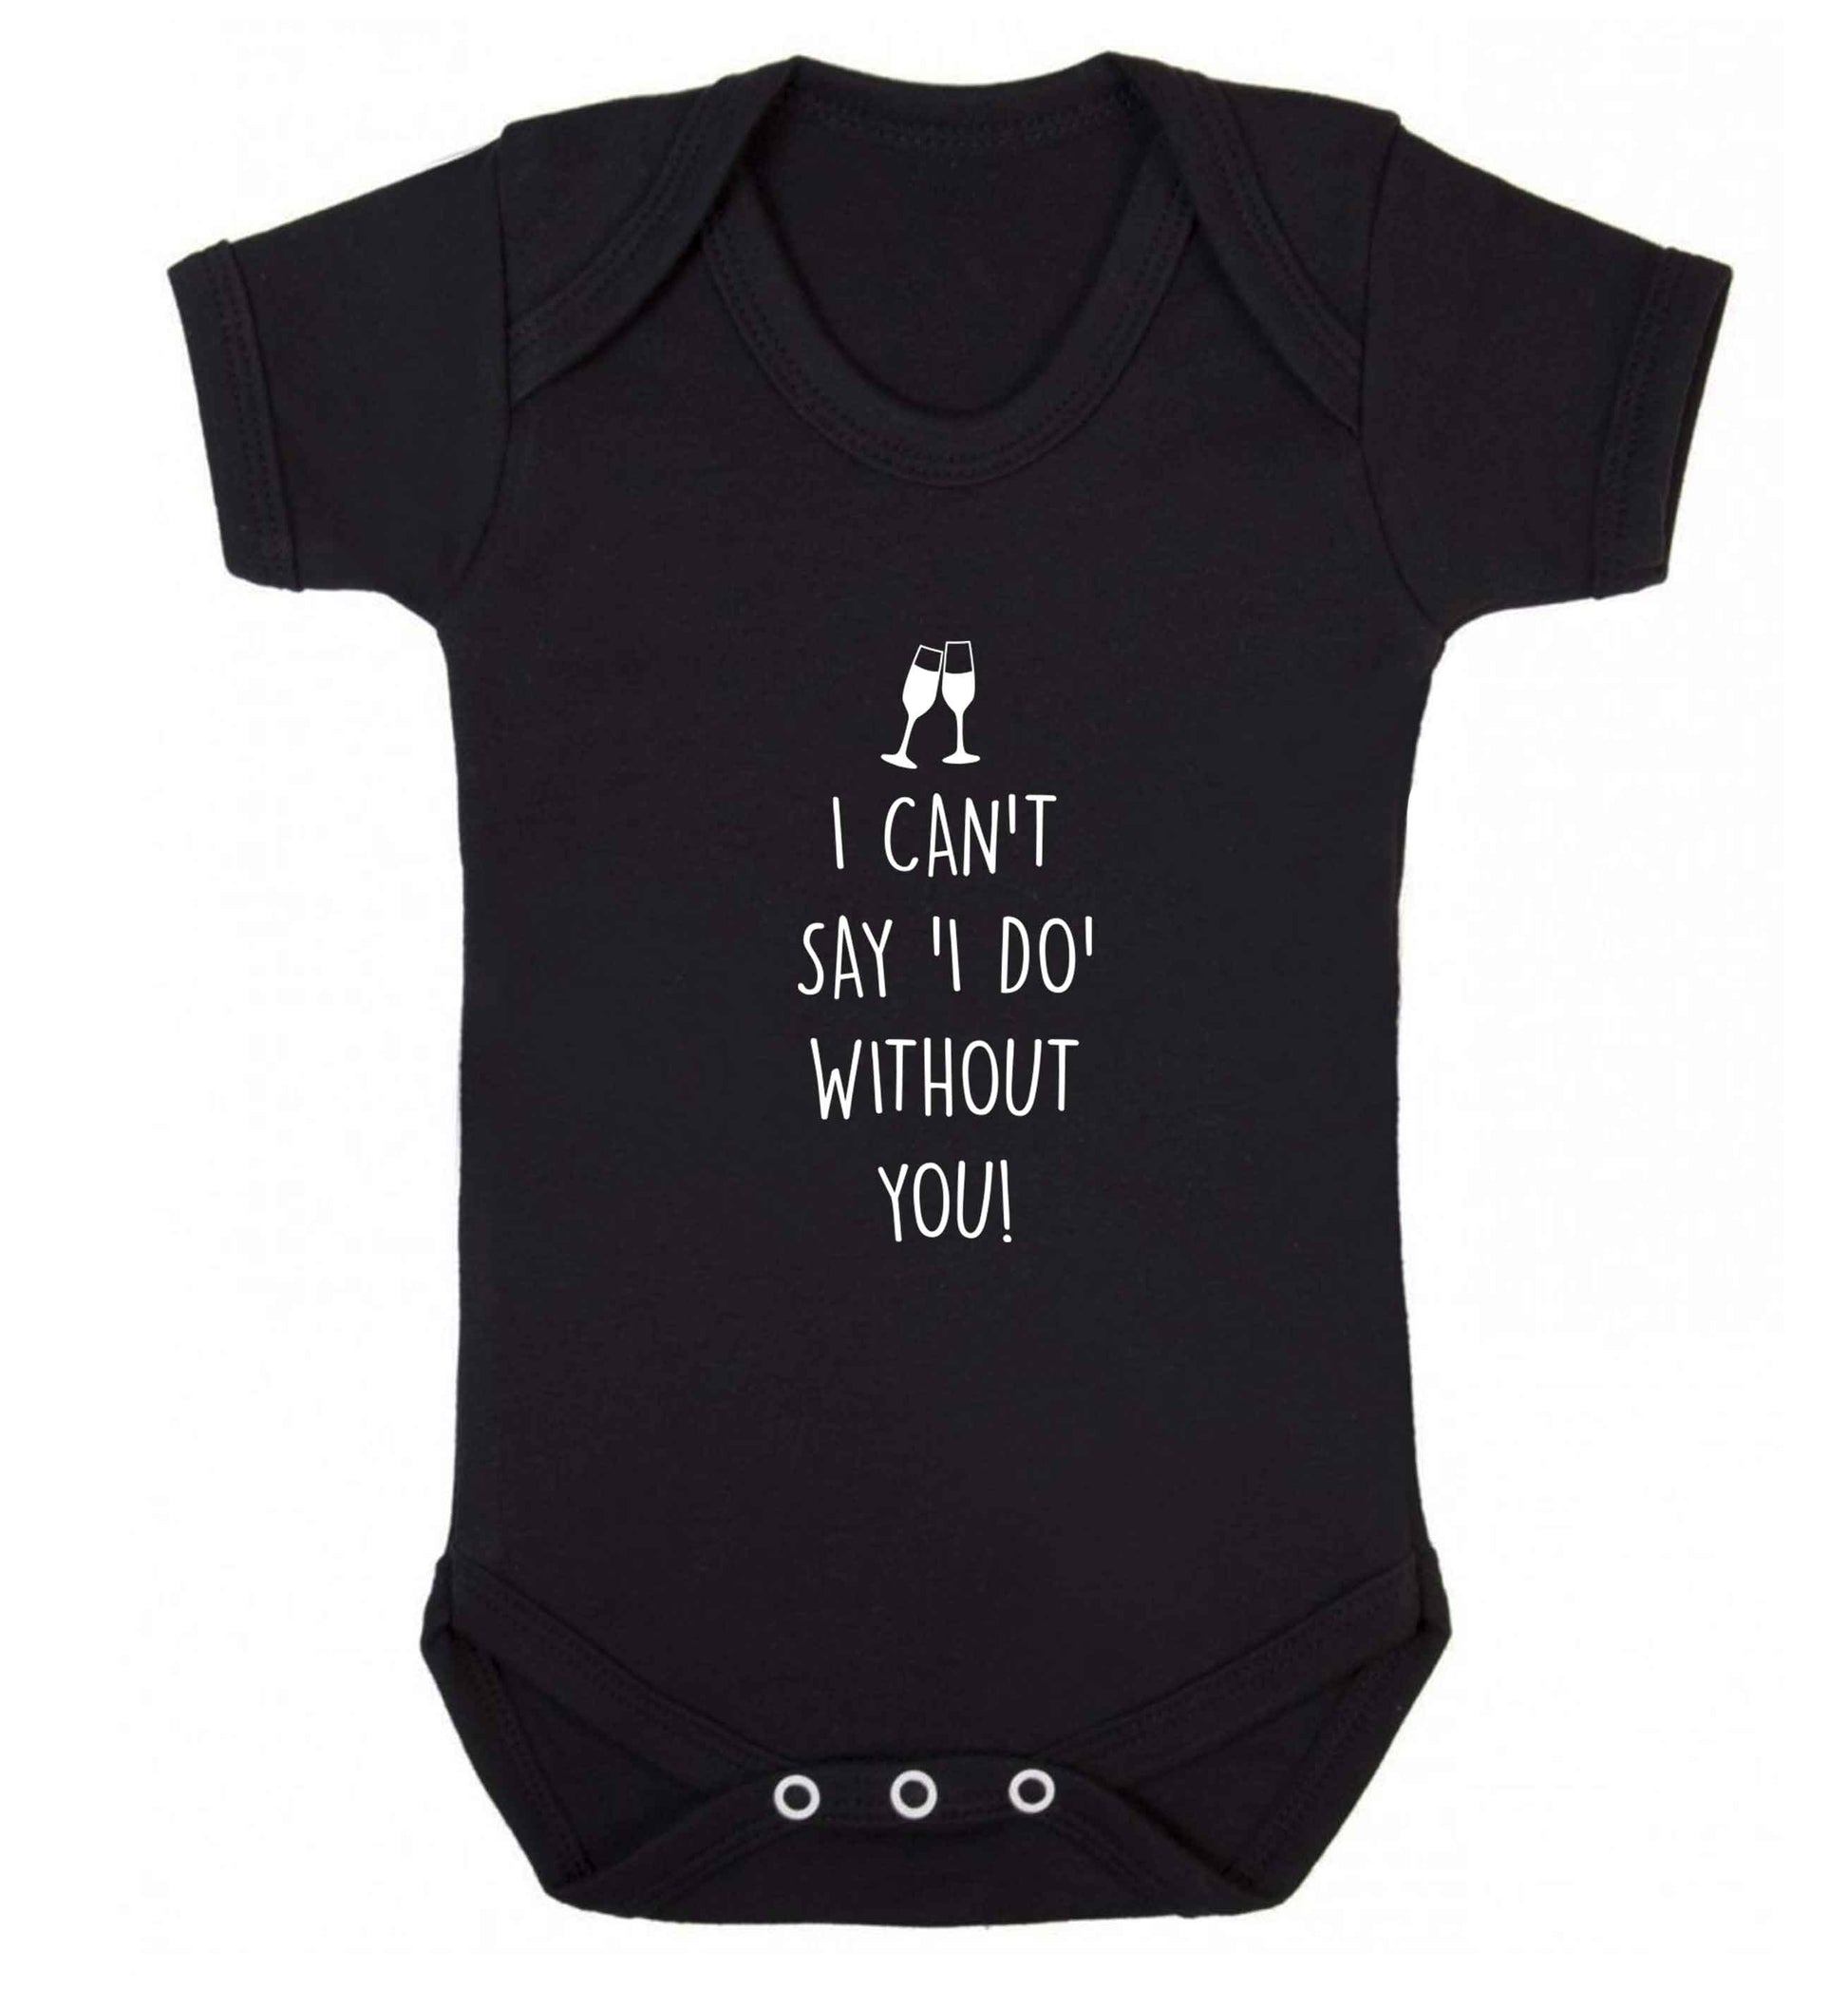 I can't say 'I do' without you! baby vest black 18-24 months